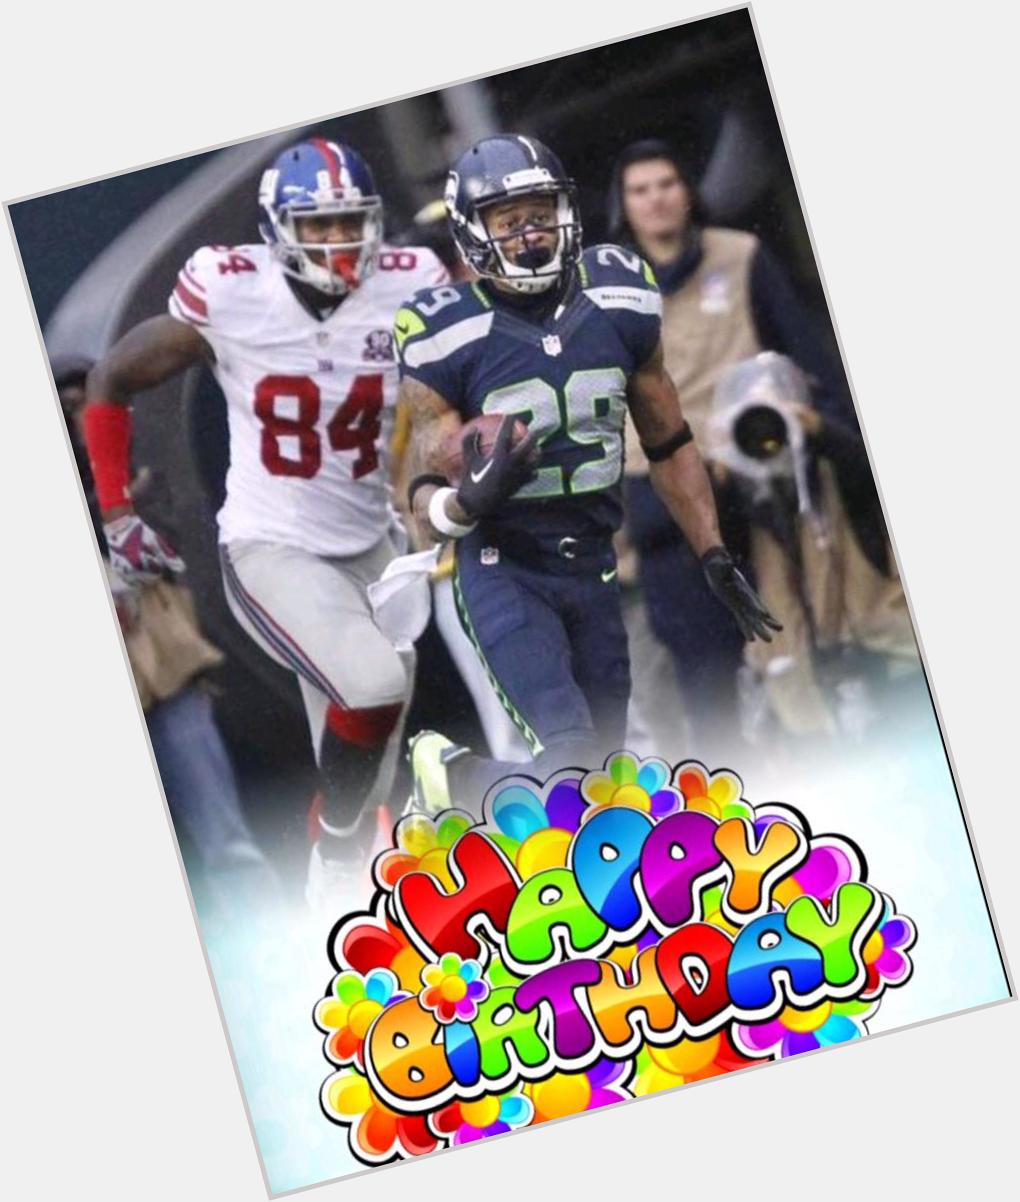 Happy Birthday to Earl Thomas! Over his career he has been to 4 pro bowls, won a Super Bowl and made 16 interceptions 